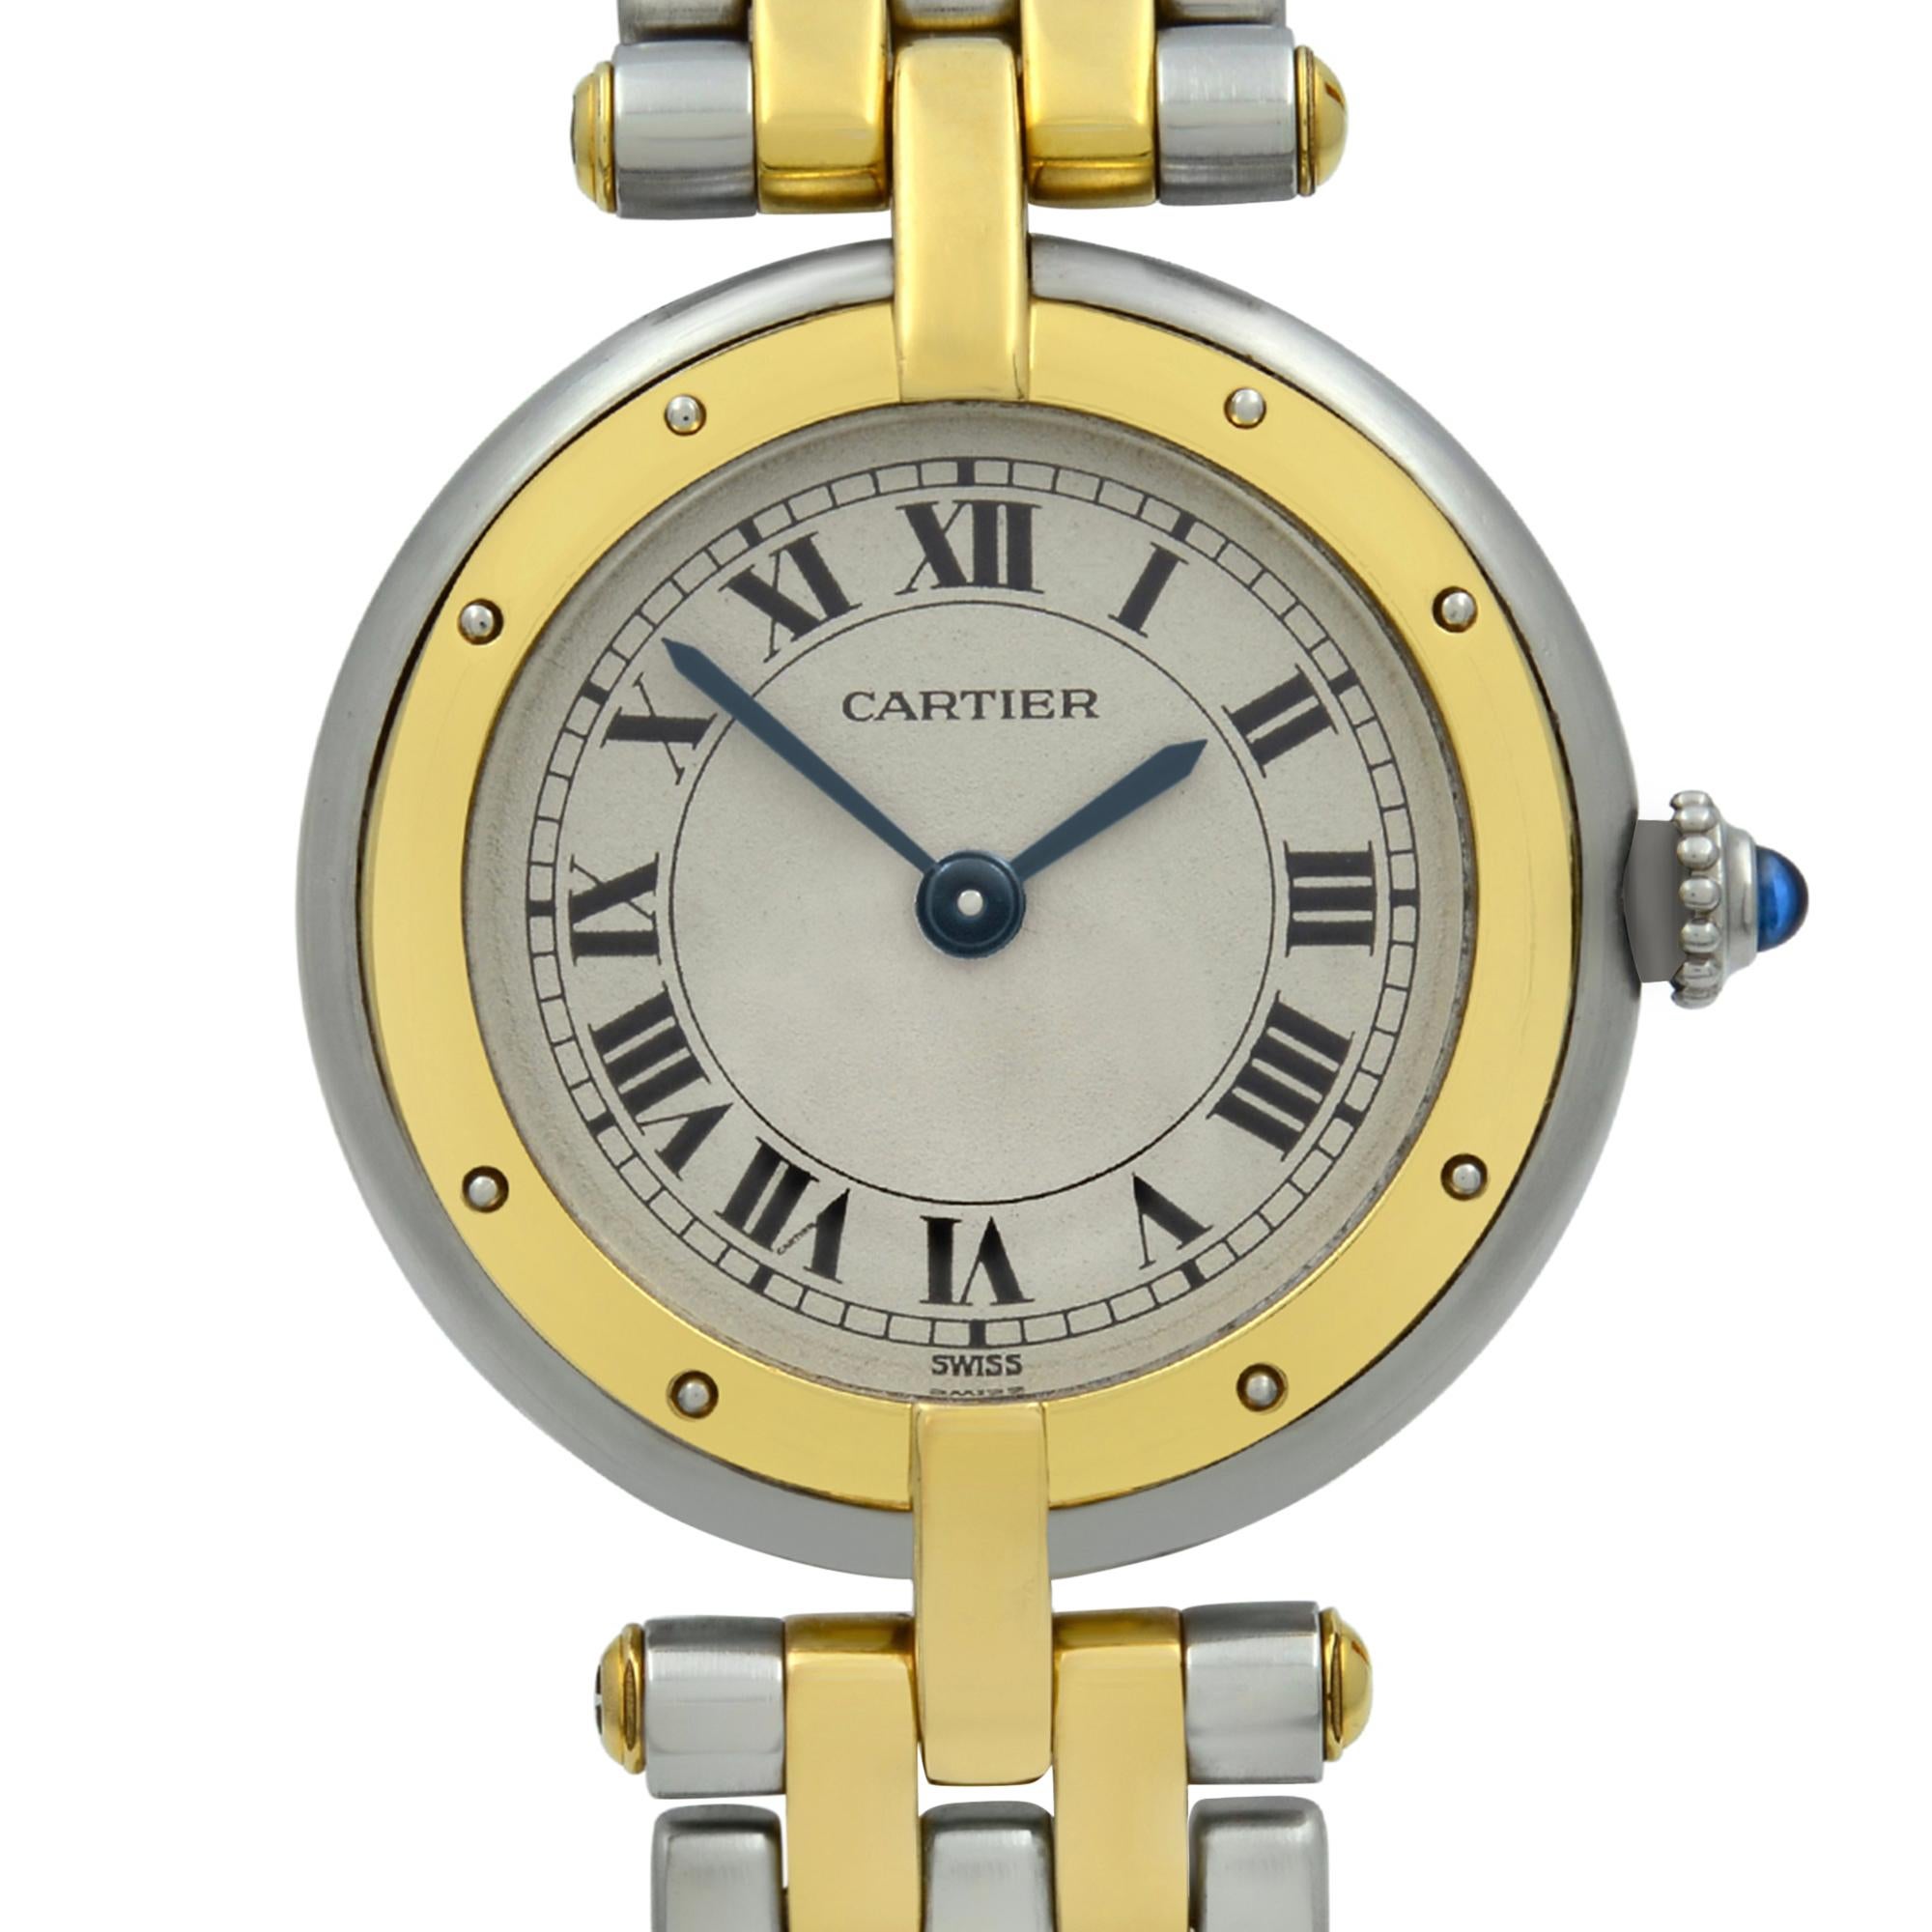 Pre-owned Cartier Panthere 18K Yellow Gold Steel Silver Dial Quartz Ladies Watch. Band Shows Minor Slacks Due to the Age of the Watch.  Original Box and Papers are not included comes with a Chronostore presentation box and authenticity card. Covered